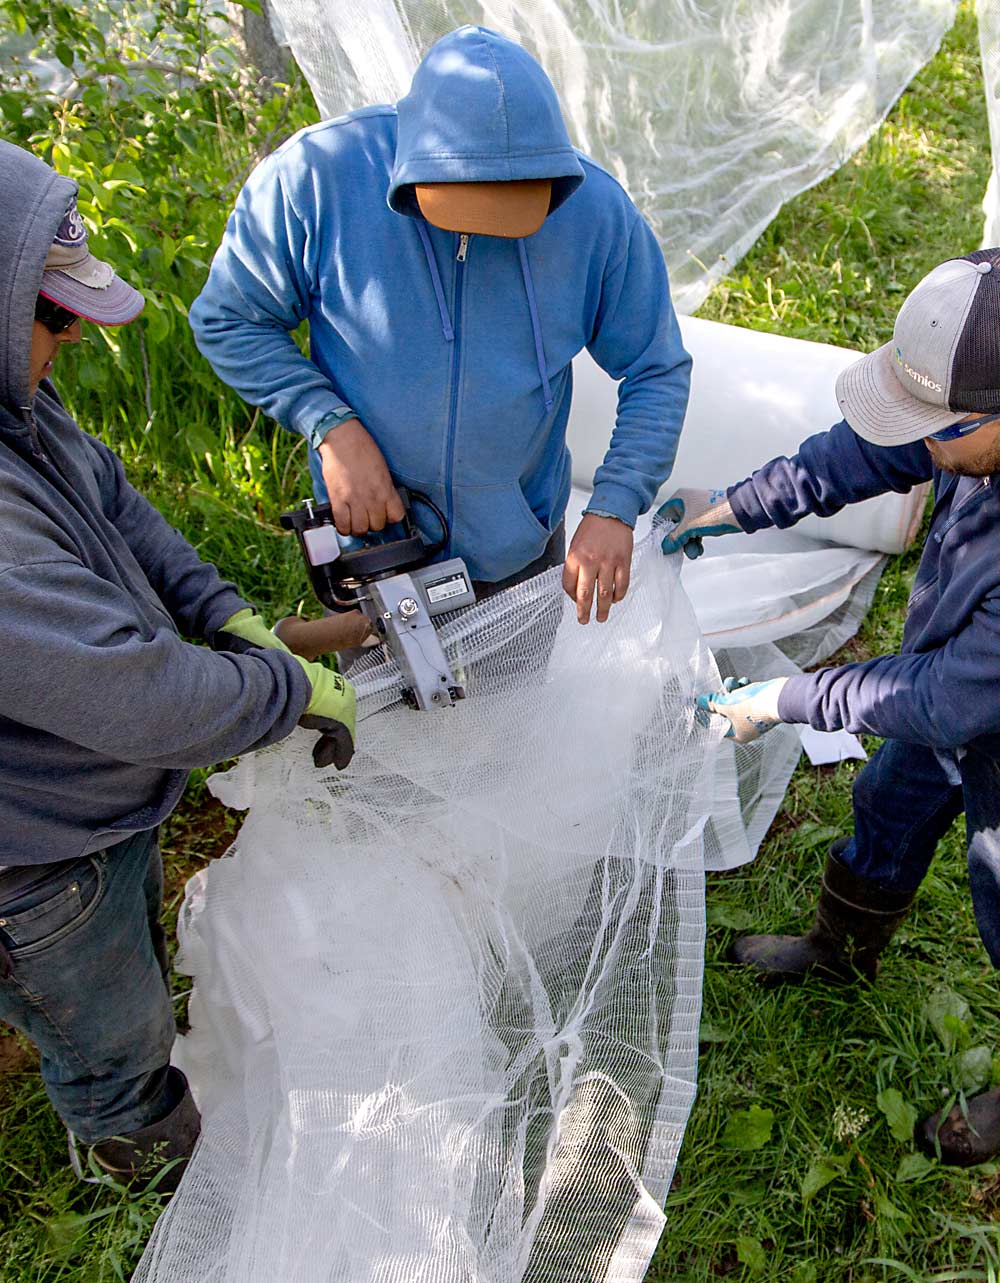 Borja, center, uses a battery-powered sewing machine to stitch together the ends of two sections of fabric, while Carlos Morales, left, and Enrique Sandoval stretch the seam flat. (Ross Courtney/Good Fruit Grower)